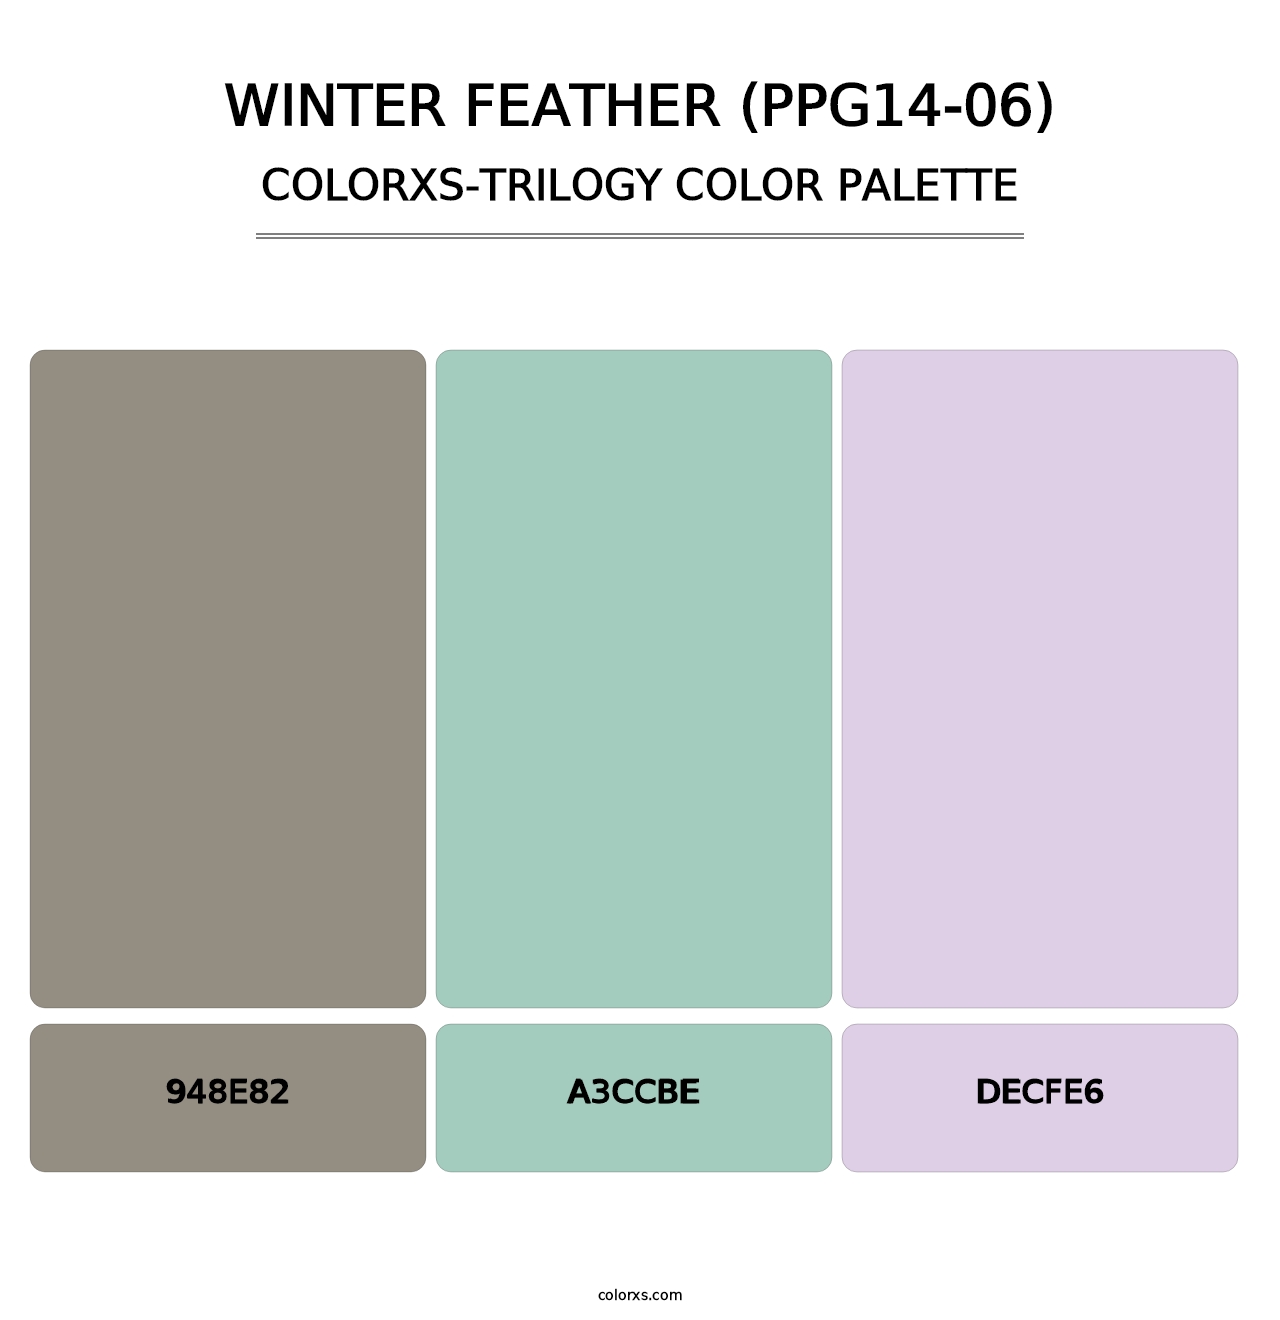 Winter Feather (PPG14-06) - Colorxs Trilogy Palette